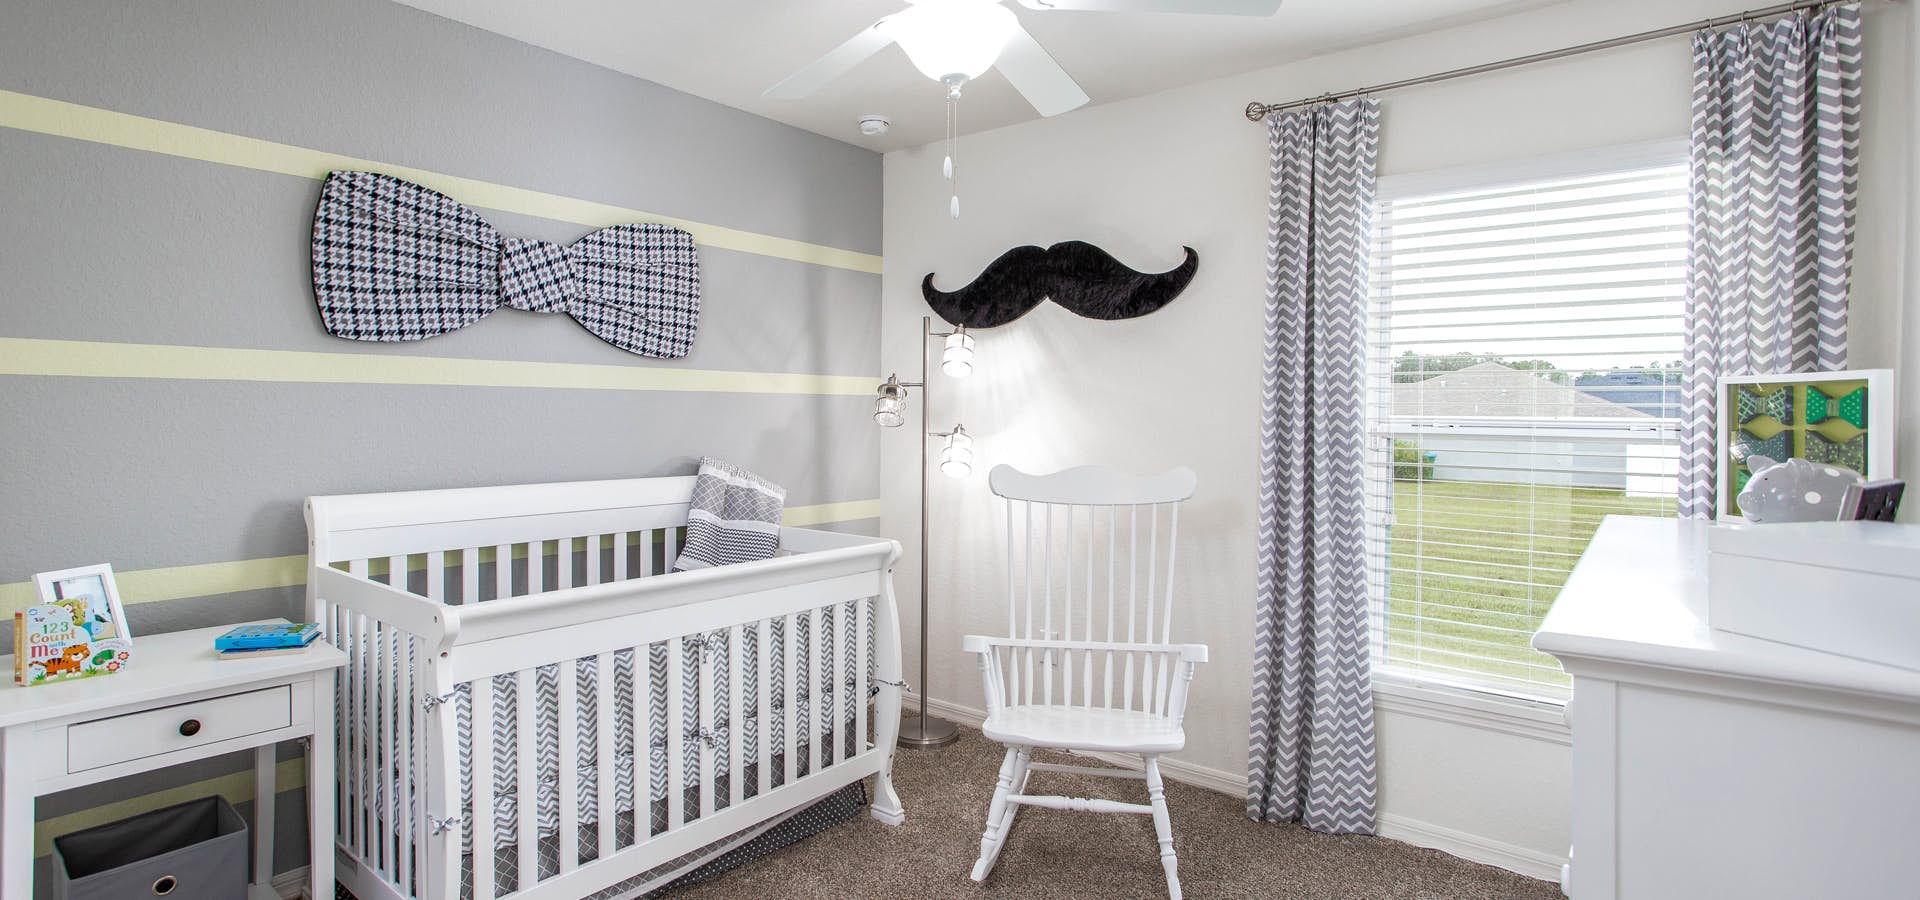 Baby's room with a striped accent wall and white nursery furniture